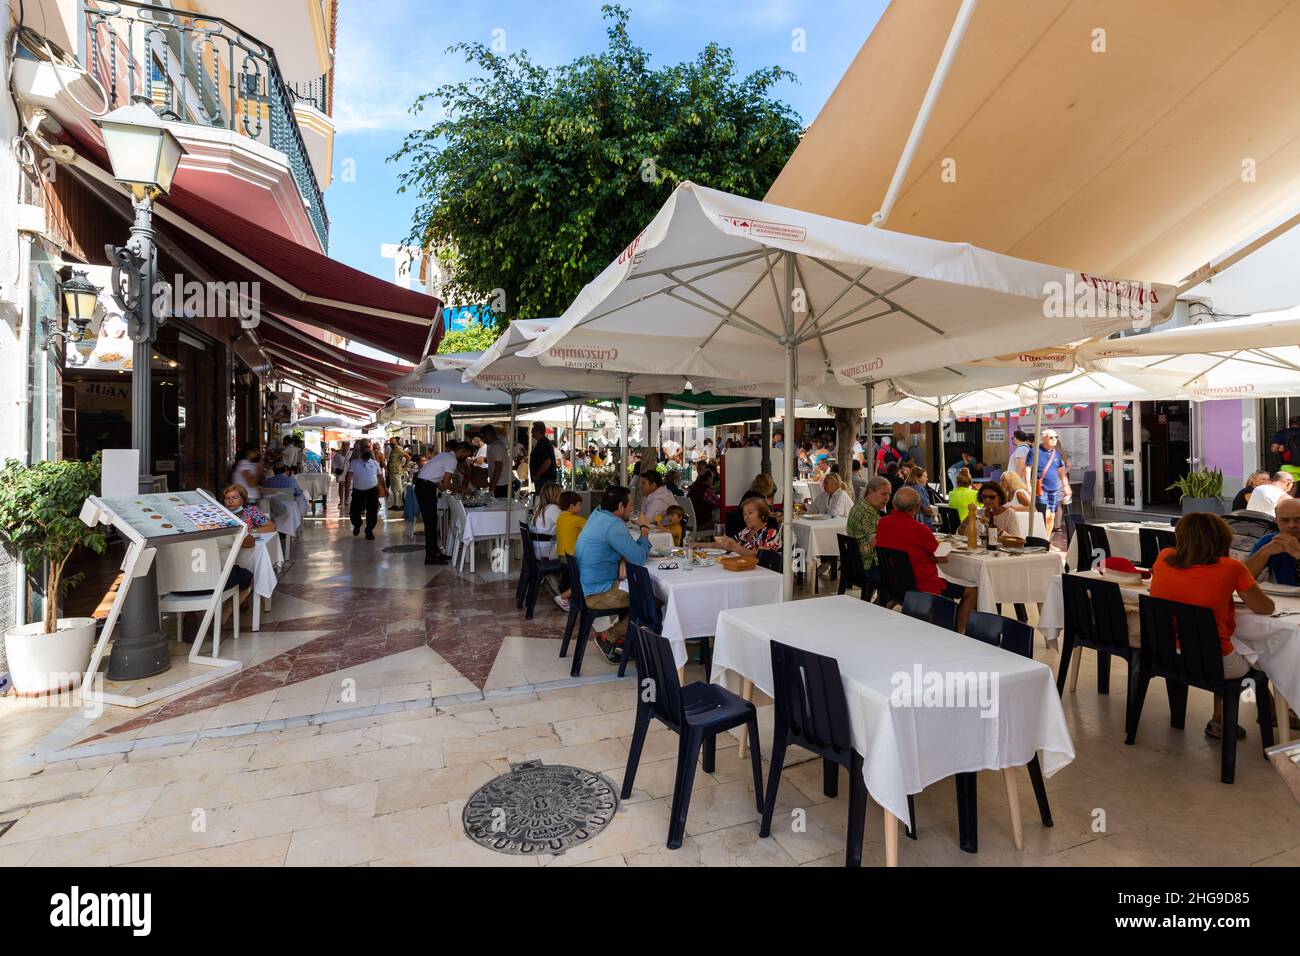 People having a meal at typical Andalucian restaurant in the Carihuela, Torremolinos, Spain Stock Photo